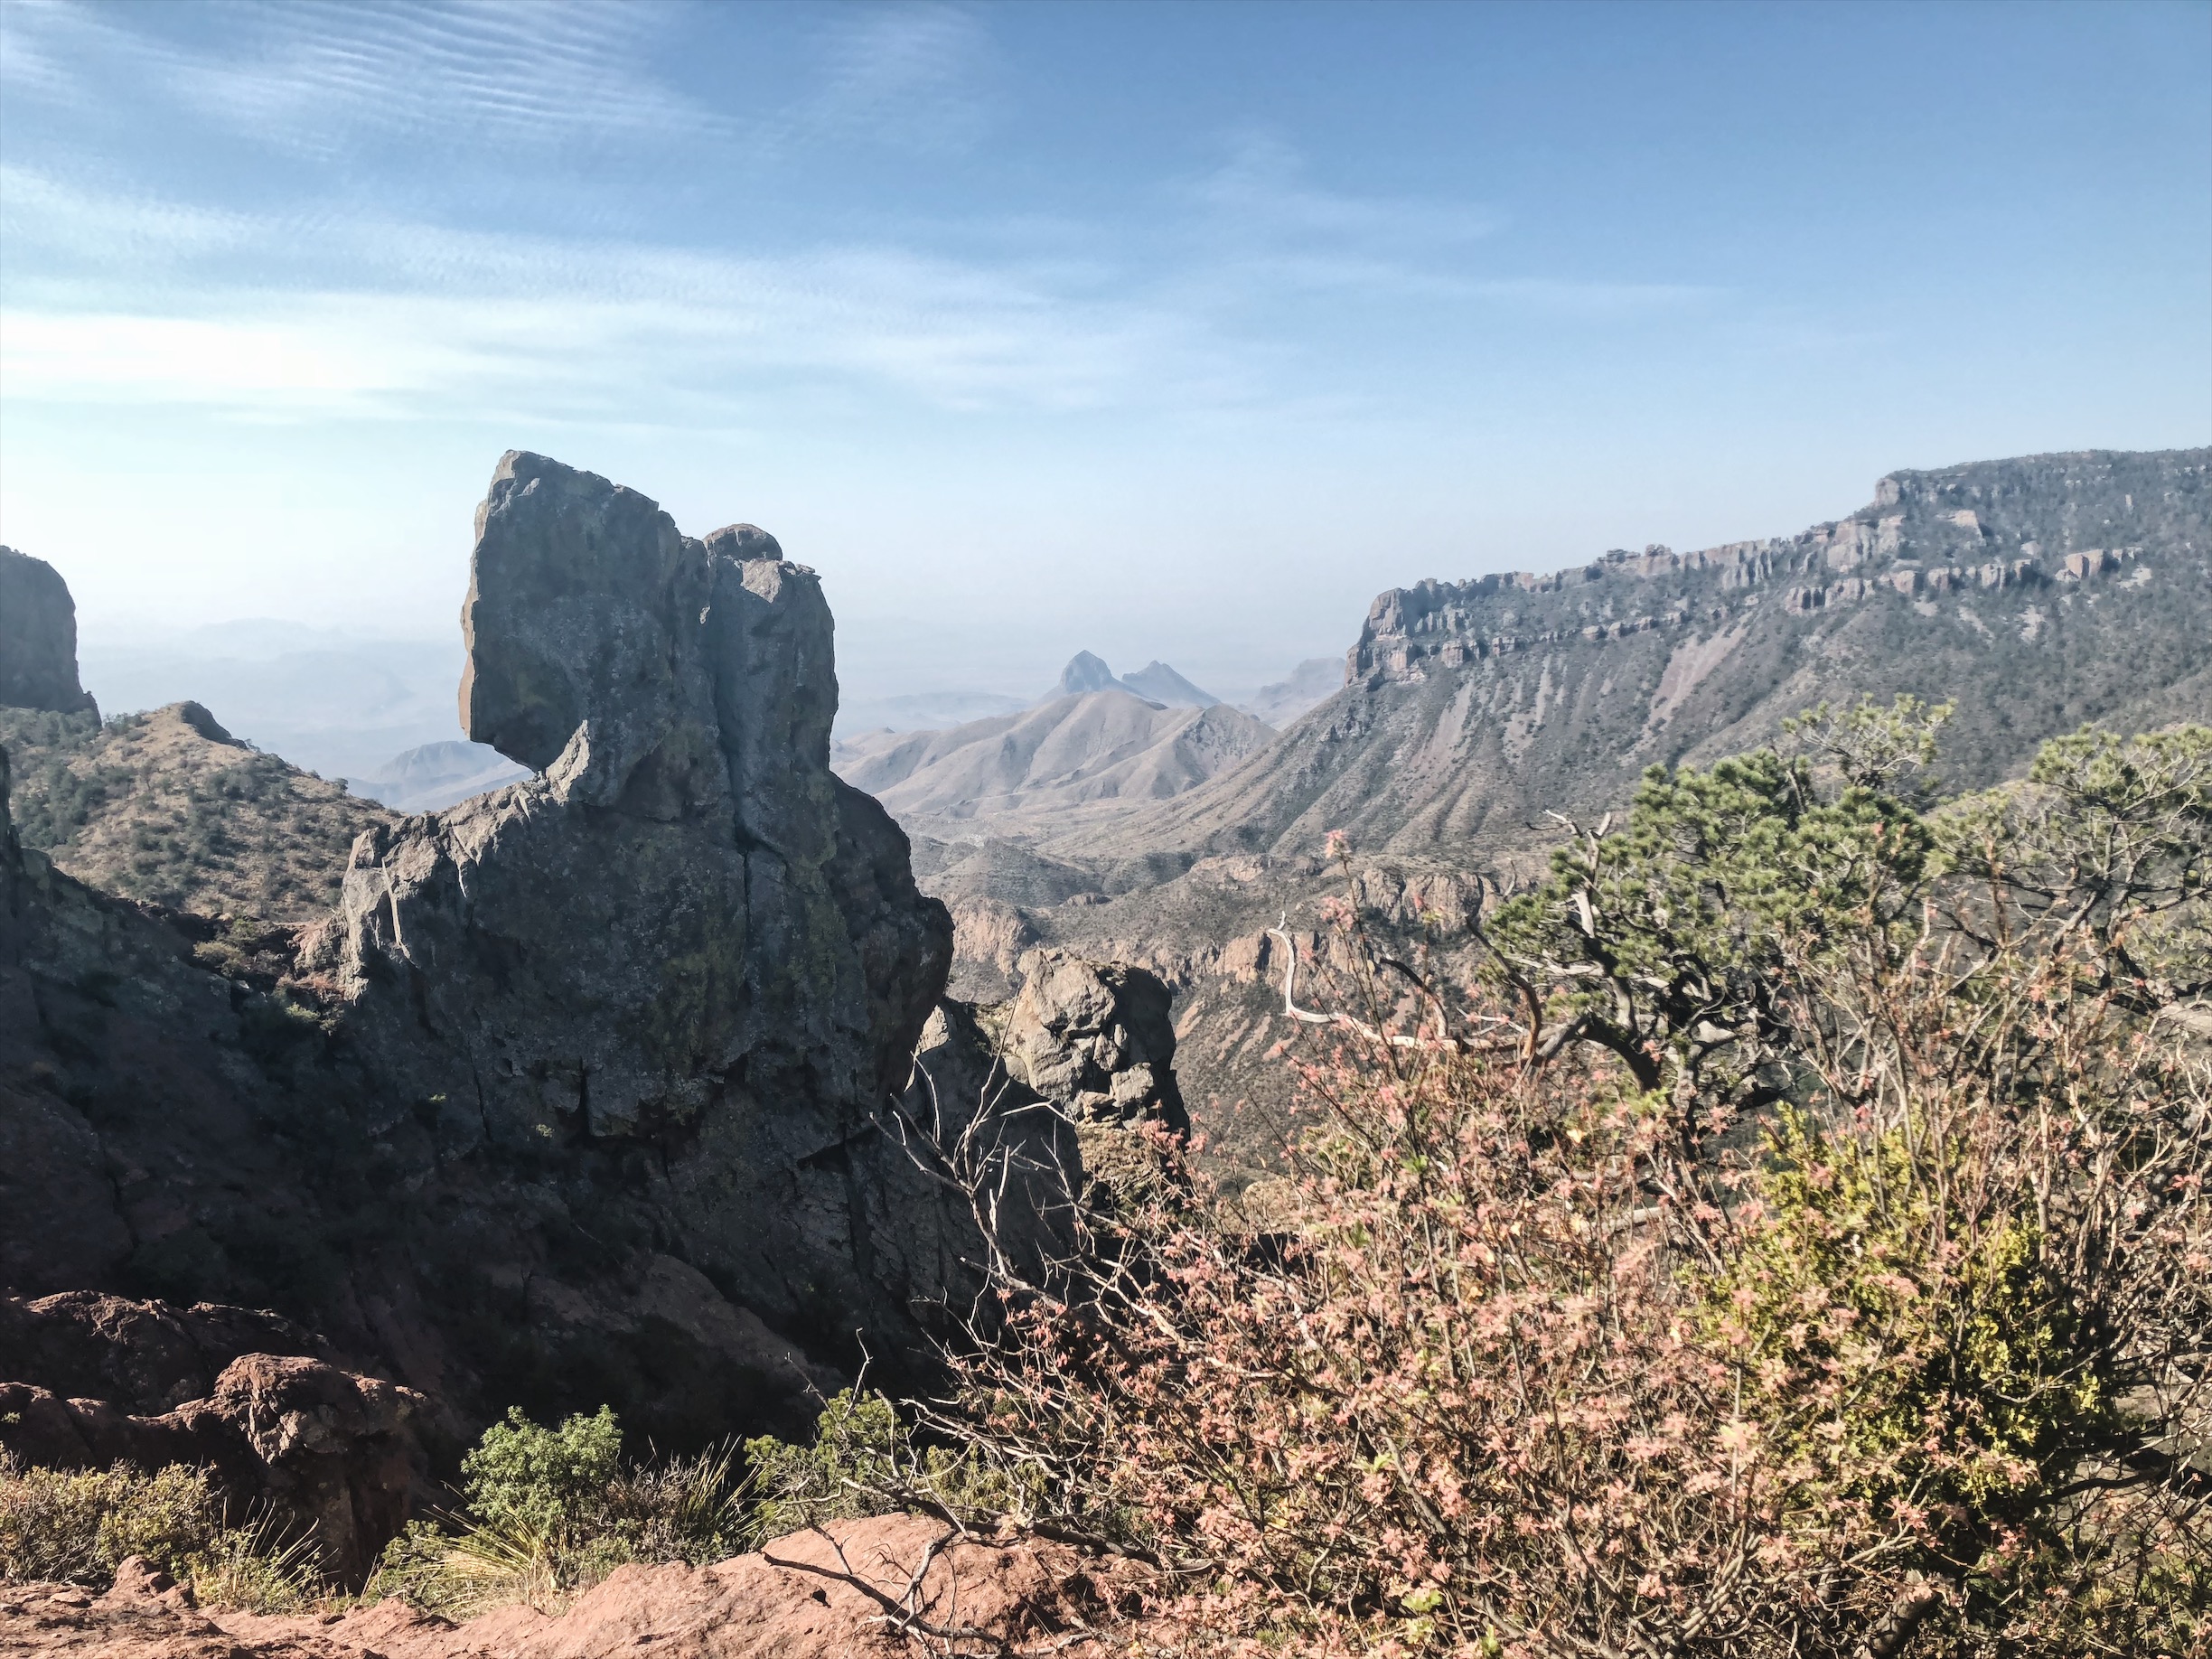 How I Spent Three Days in Big Bend National Park